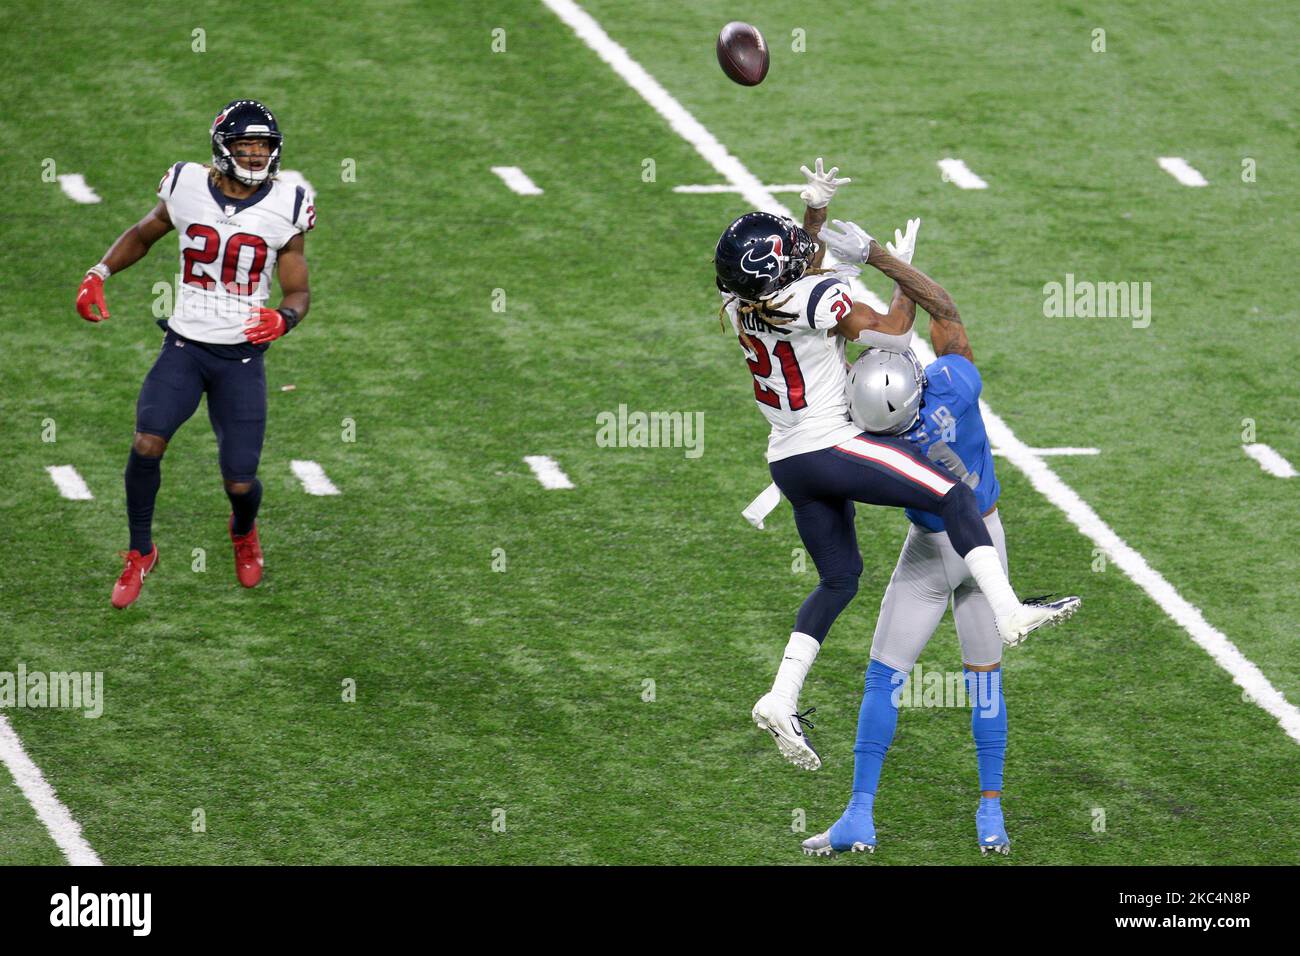 Detroit Lions wide receiver Marvin Jones (11) cannot catch a pass while being defended by Houston Texans cornerback Bradley Roby (21) during the second half of an NFL football game in Detroit, Michigan USA, on Thursday, November 26, 2020. (Photo by Jorge Lemus/NurPhoto) Stock Photo